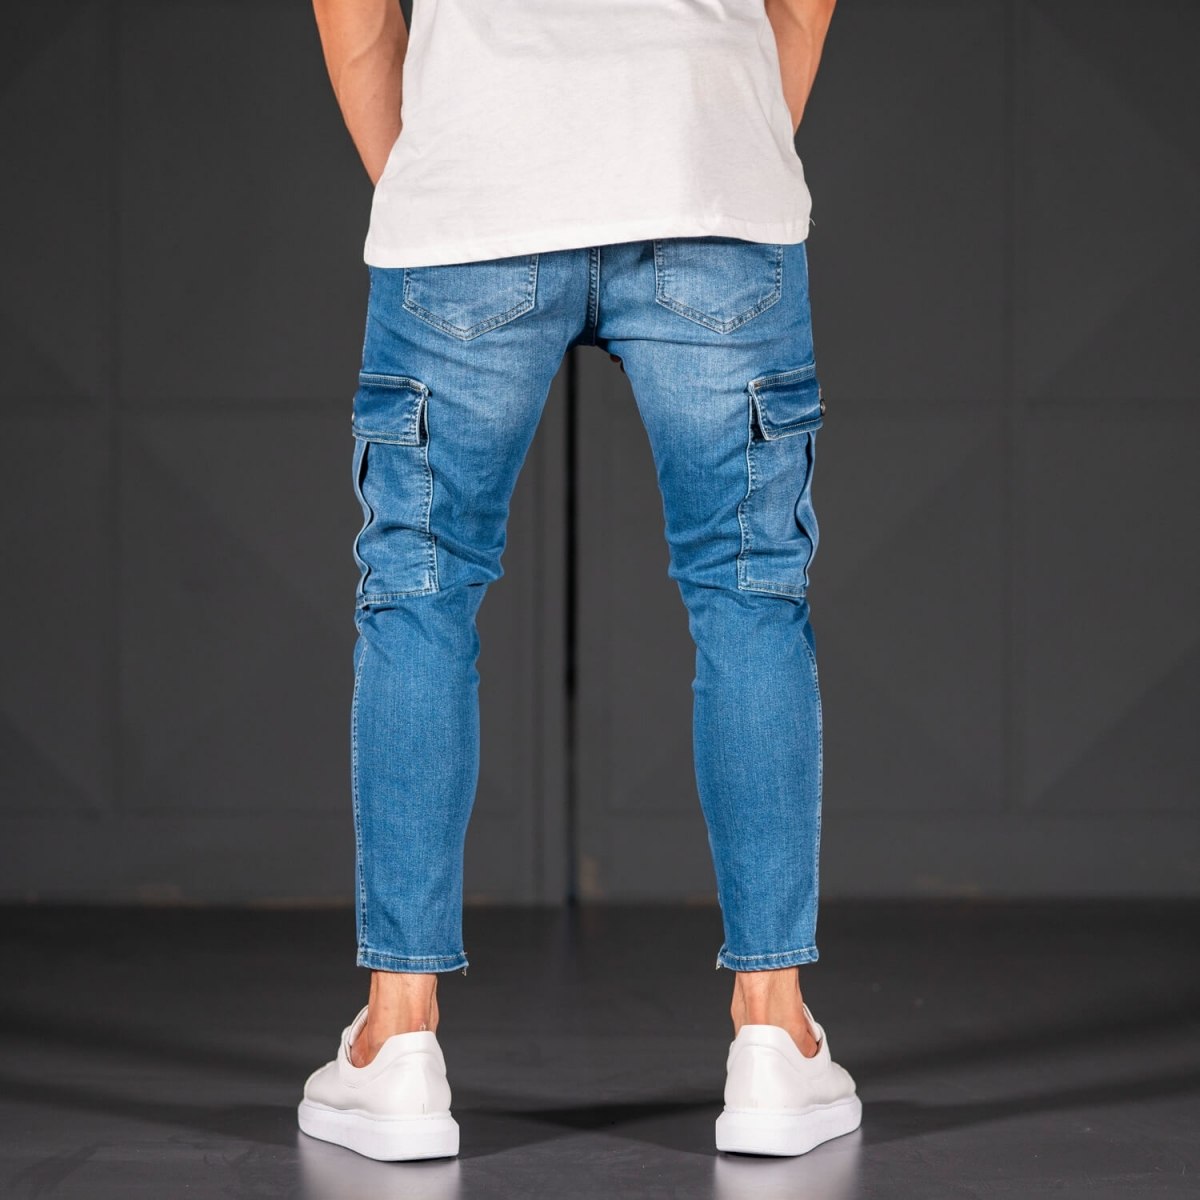 Men's Jeans with Pockets Style in Ocean Blue - 5